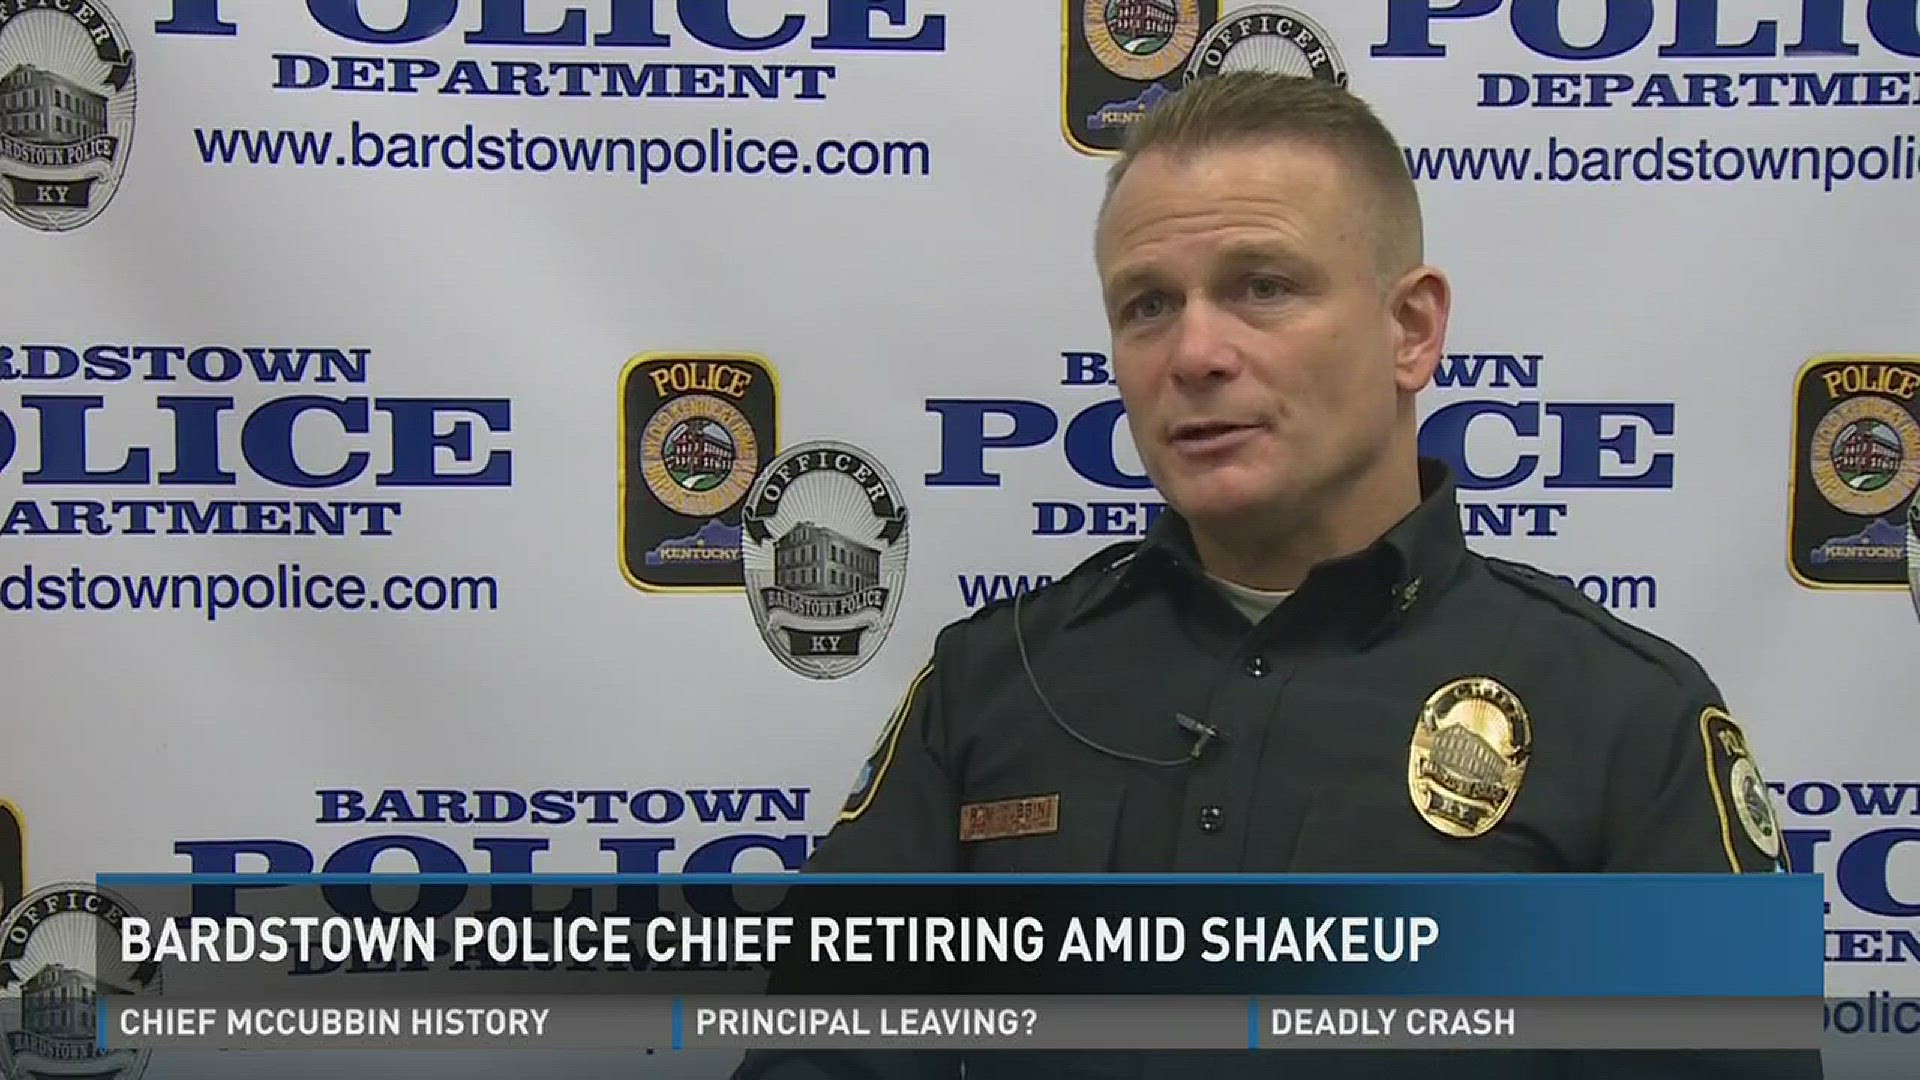 Bardstown police chief retires amid shakeup